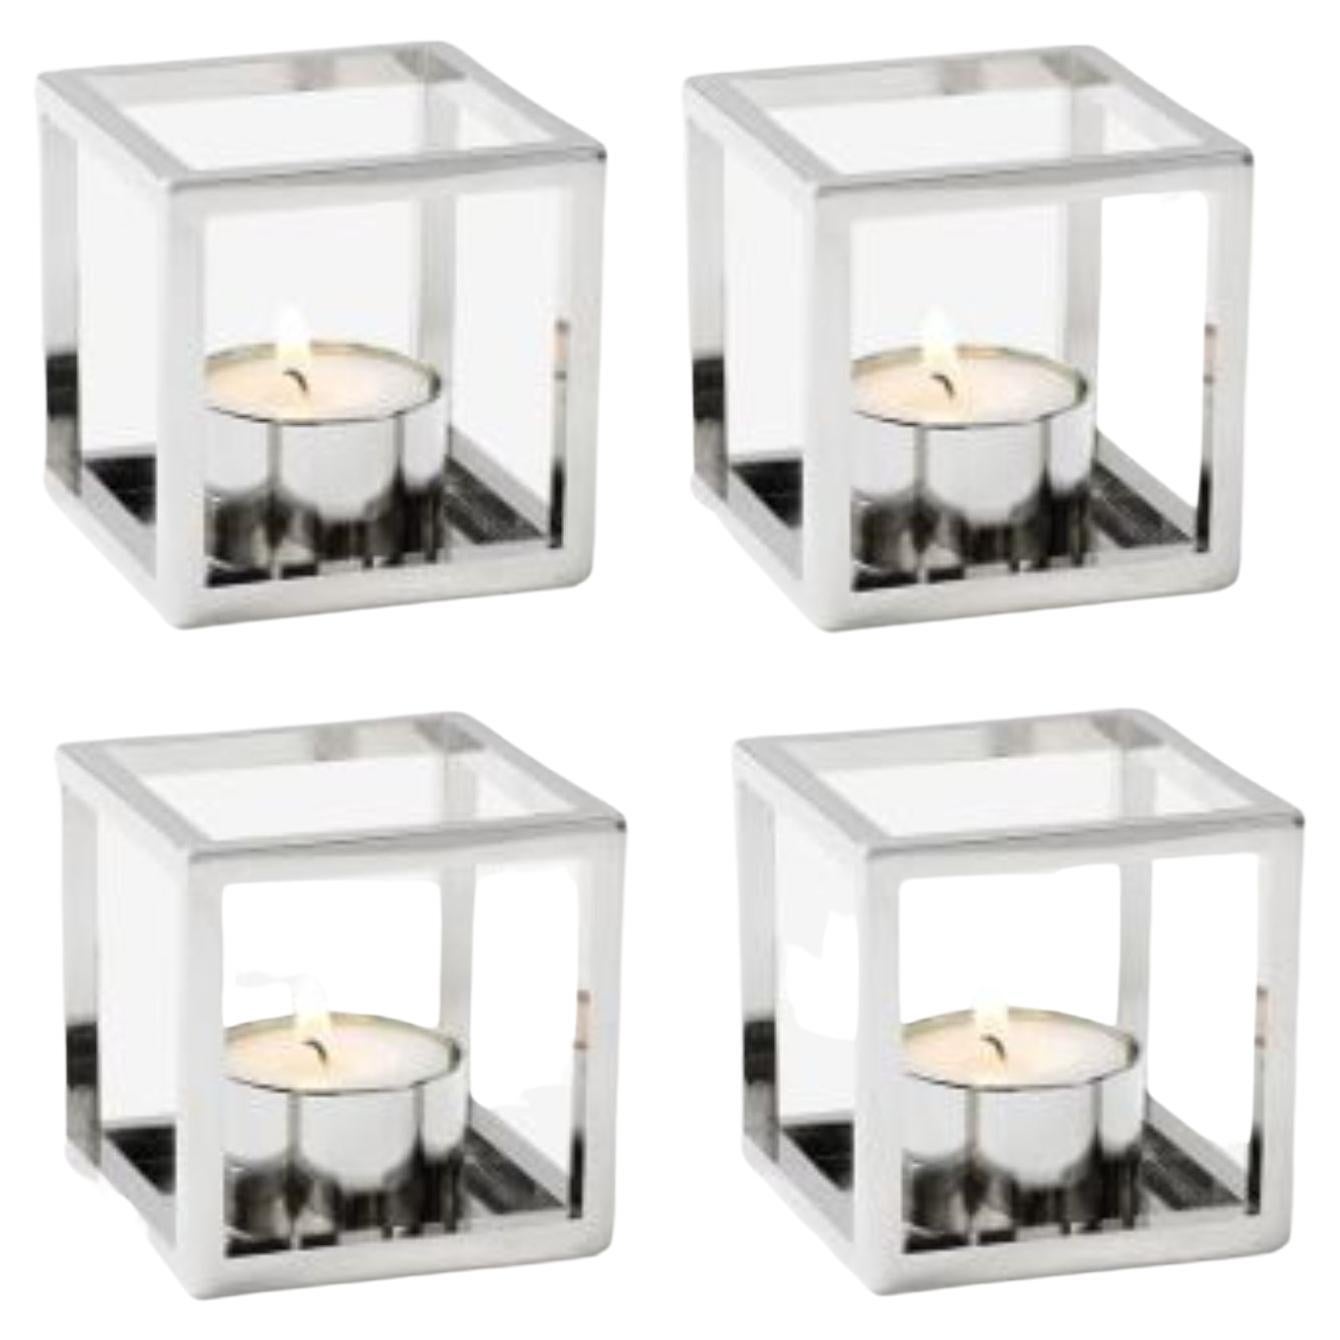 Set of 4 Nickel Plated Kubus T Candle Holders by Lassen For Sale